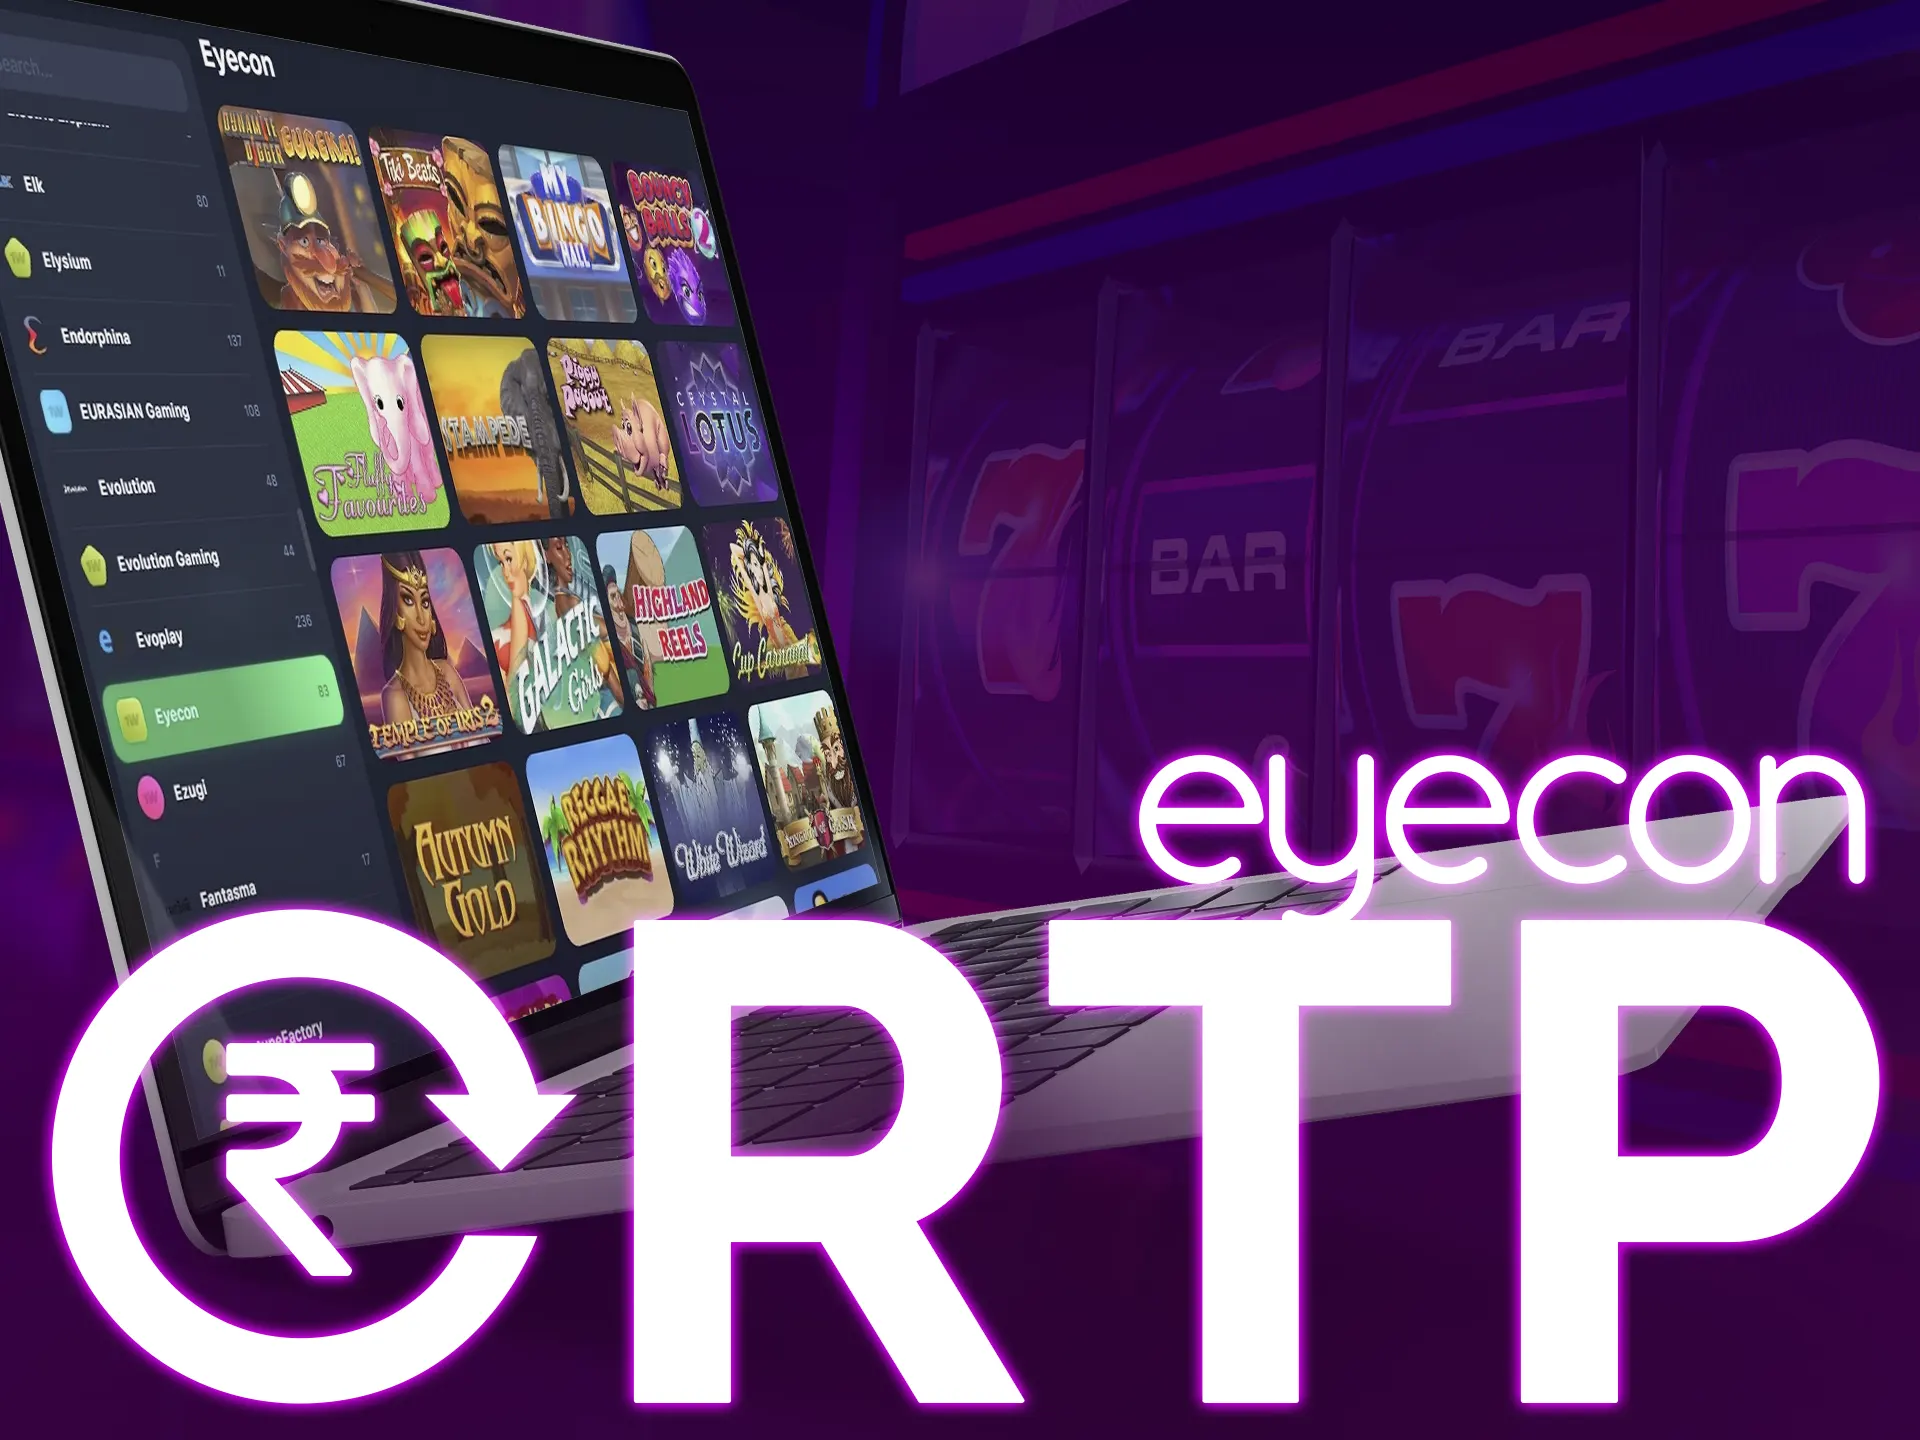 Eyecon provides games with high RTP percentages.